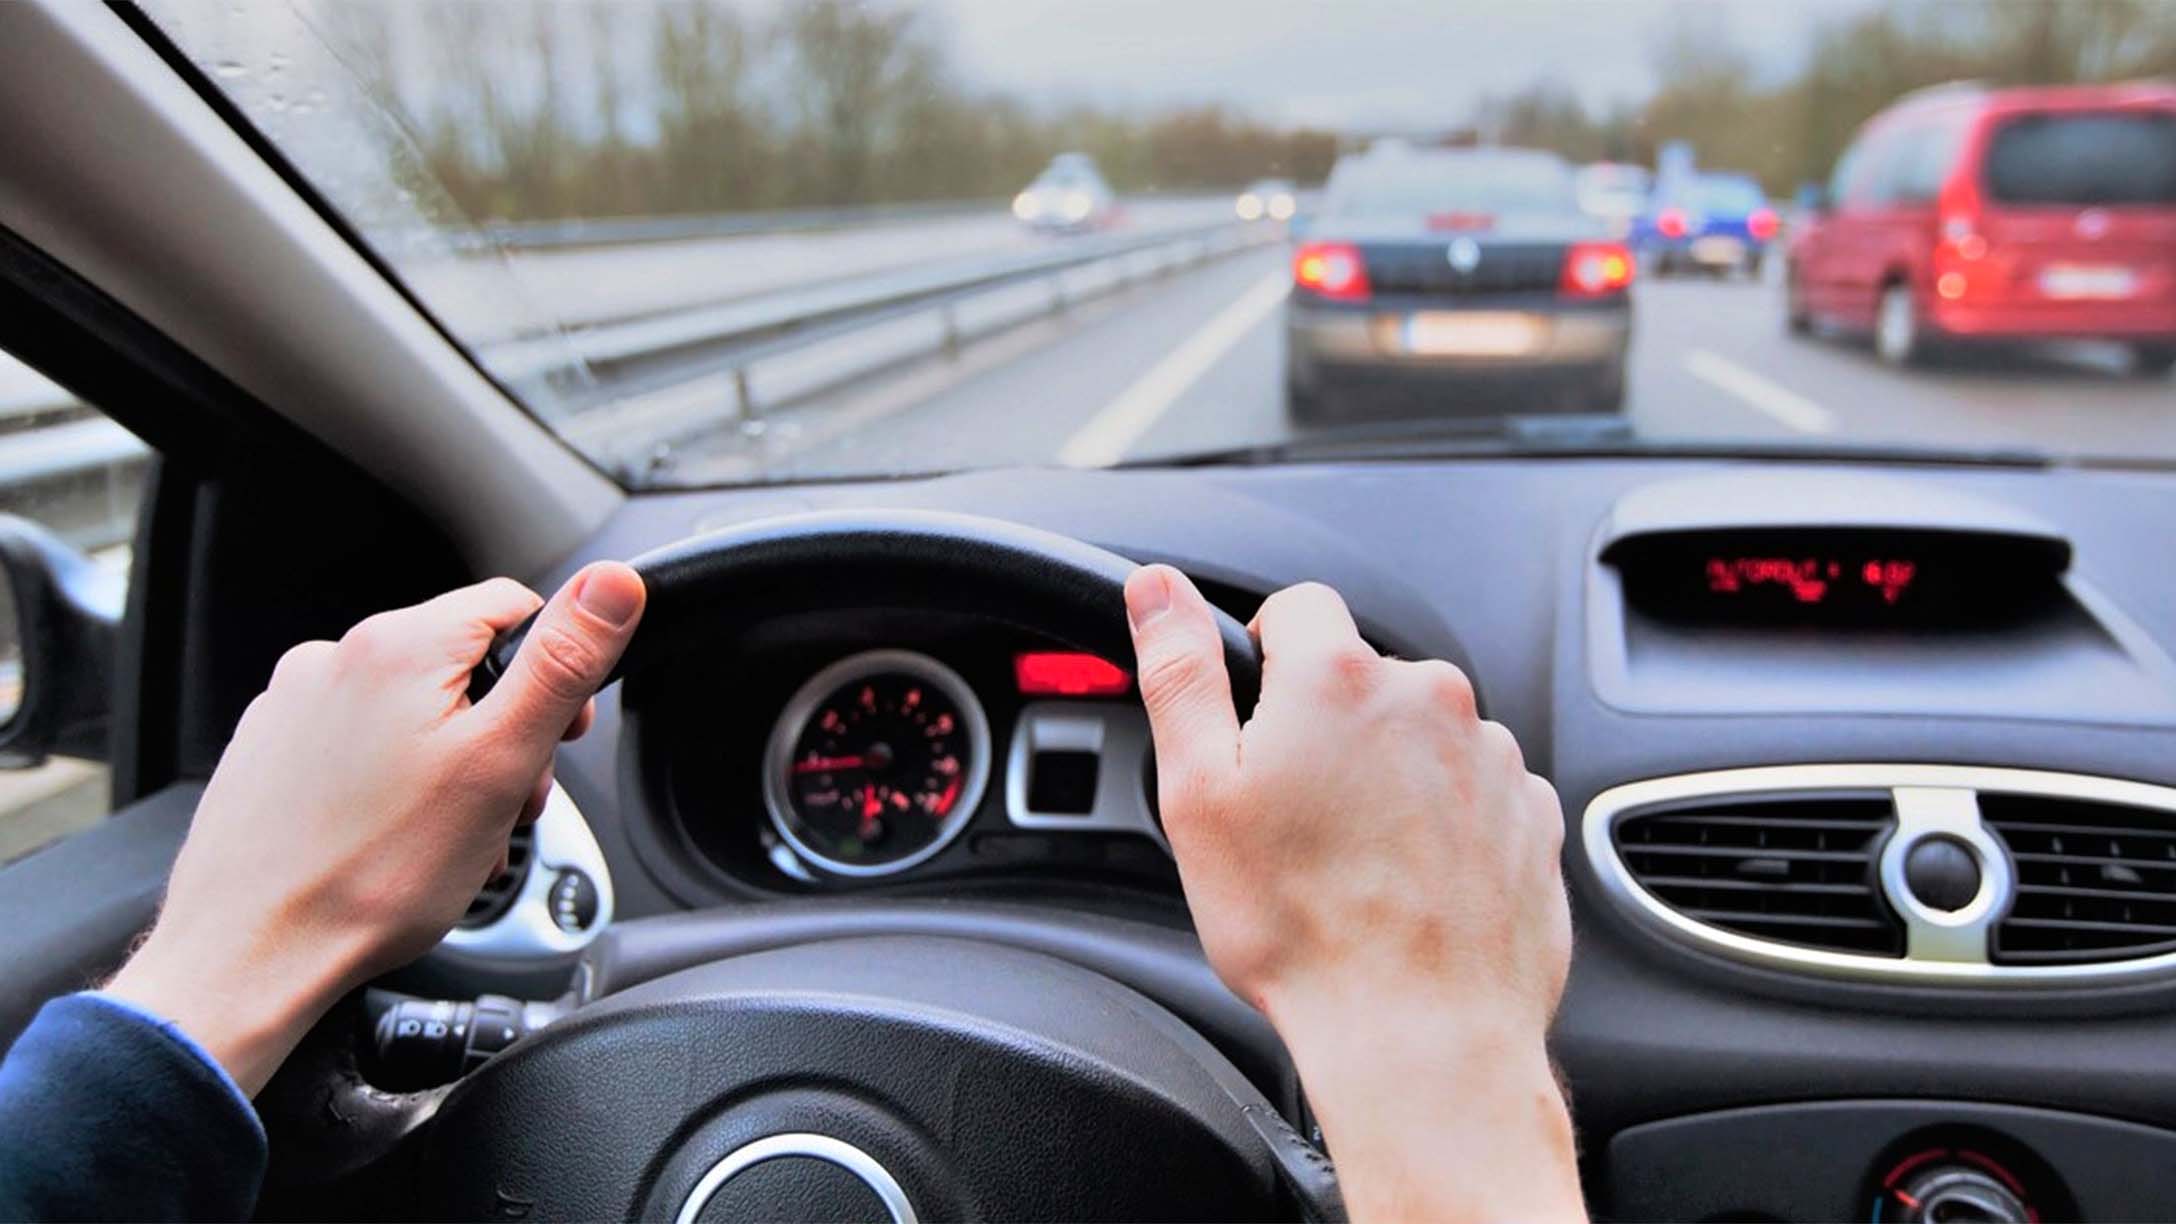 Point of view of a person driving with two hands on the steering wheel on a highway